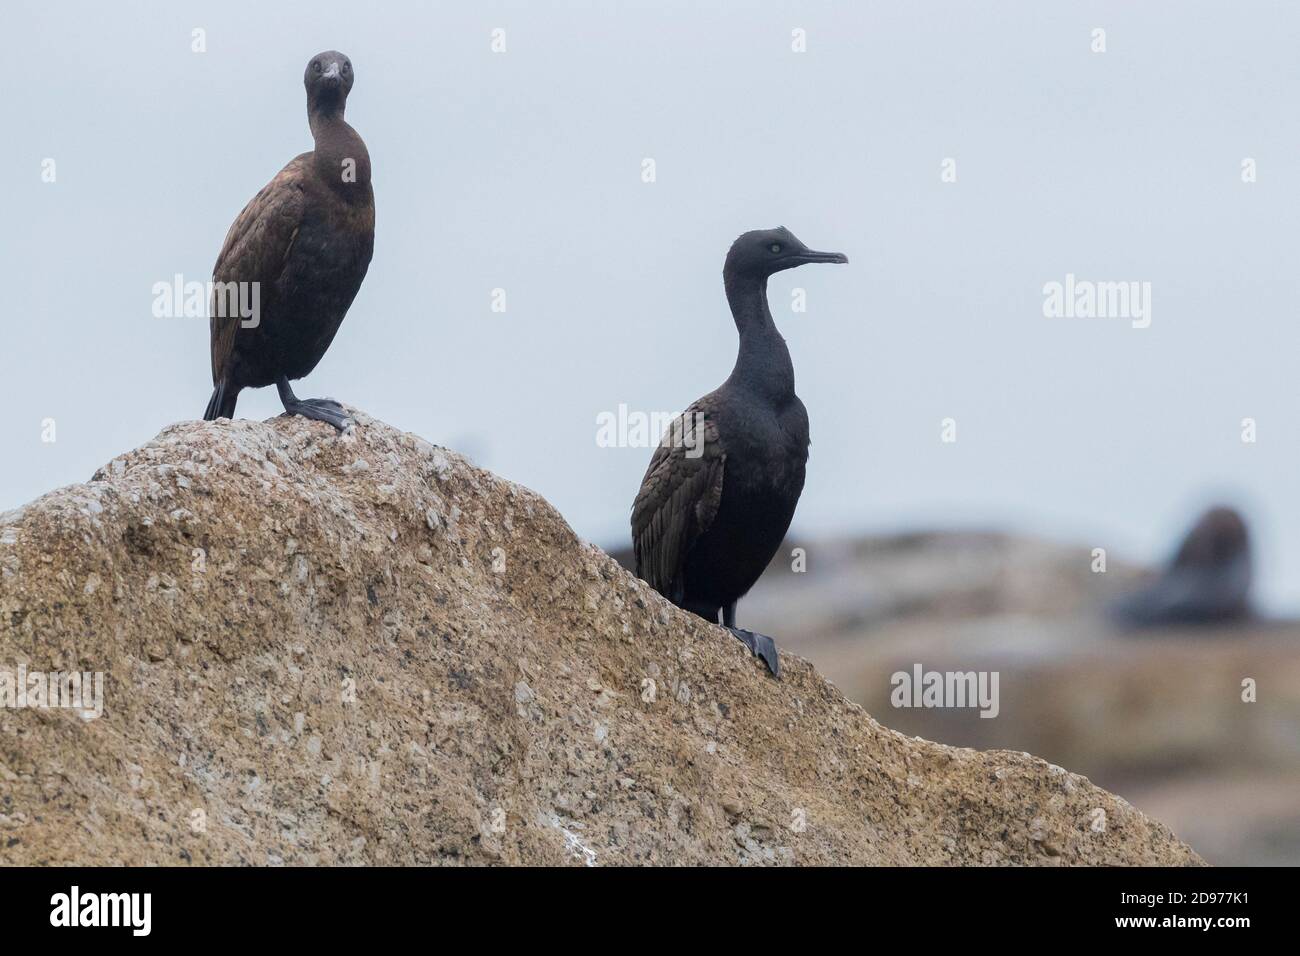 Bank Cormorant (Phalacrocorax neglectus), two individuals perched on a rock, Western Cape, South Africa Stock Photo